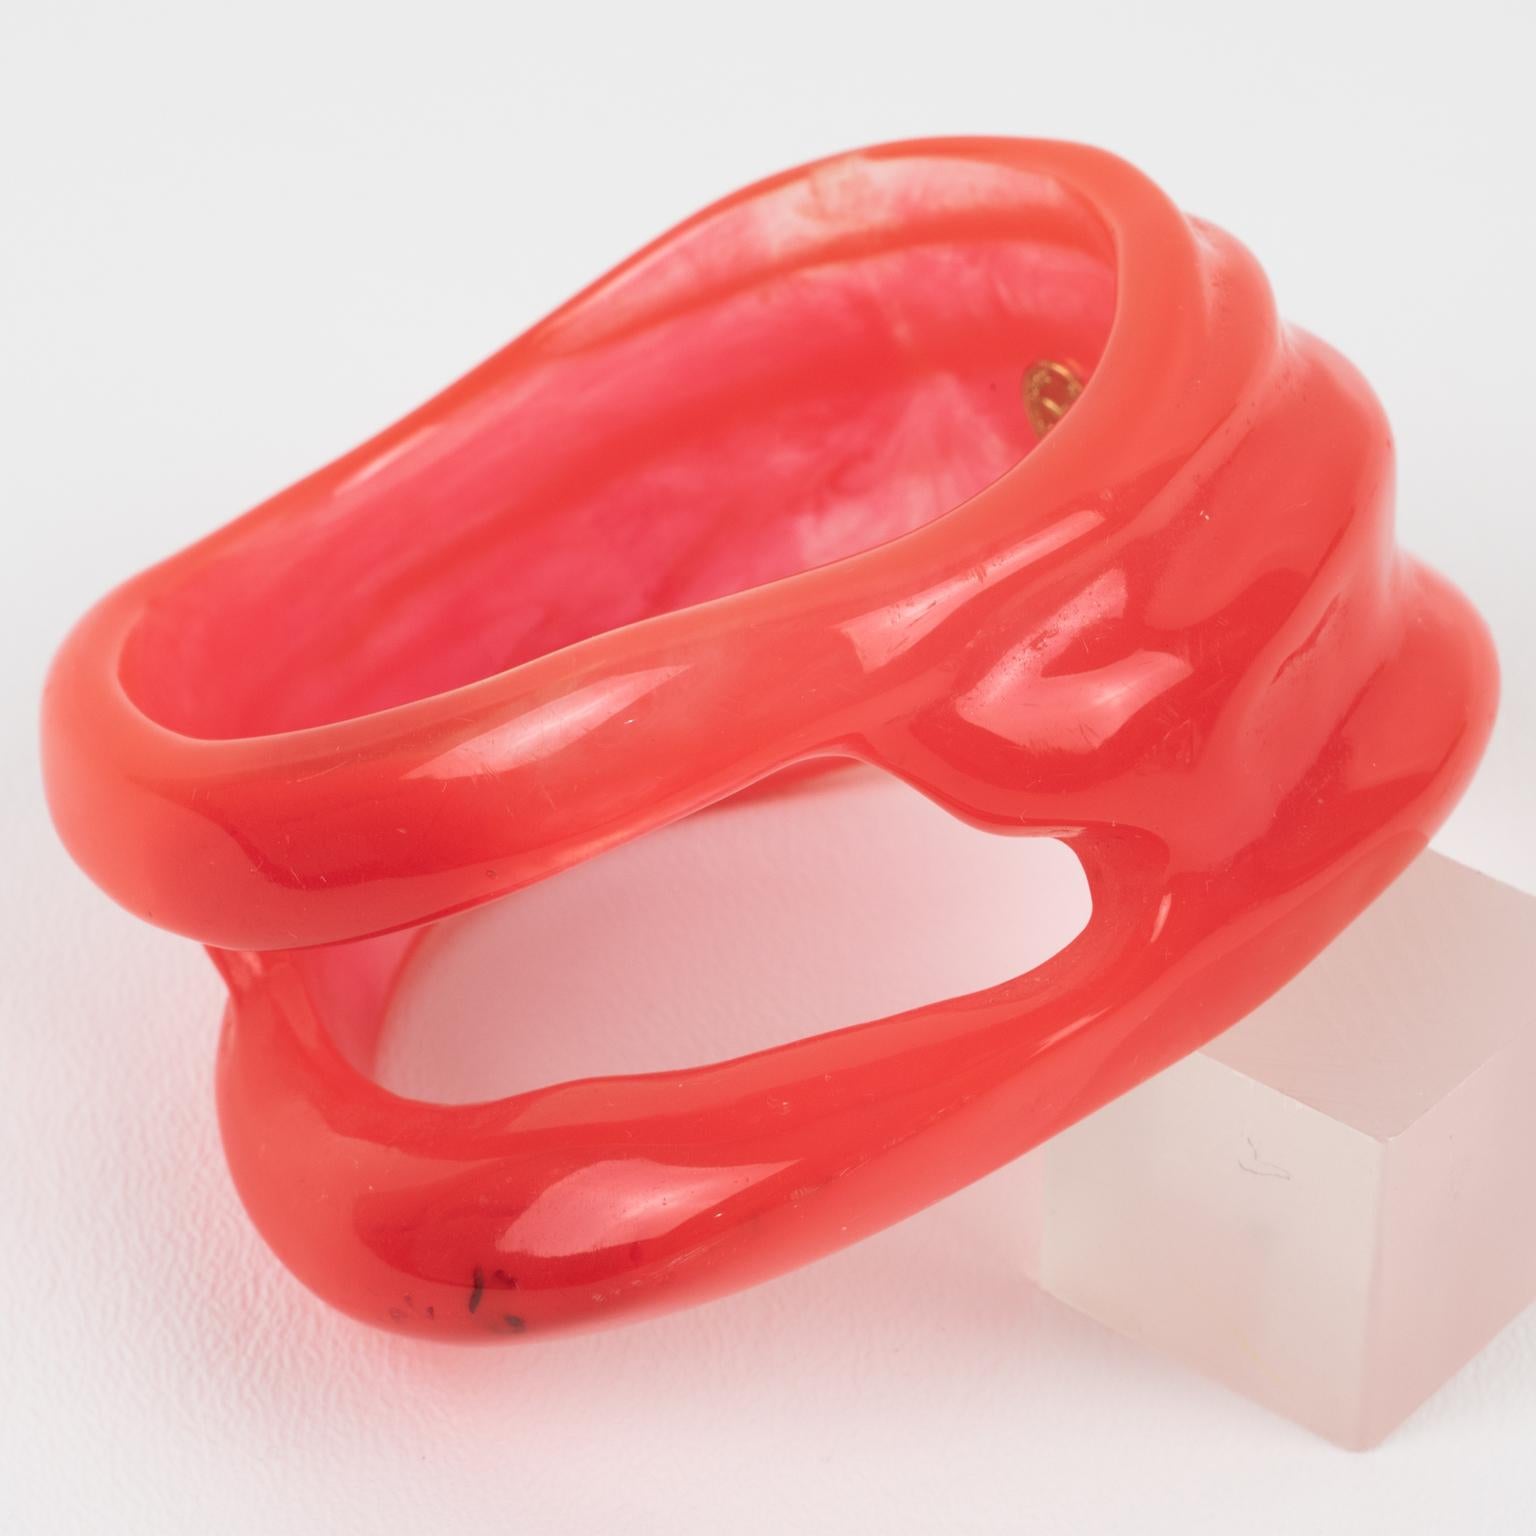 Christian Lacroix Space Age Pink-Red Resin Lucite Bangle Bracelet In Excellent Condition For Sale In Atlanta, GA